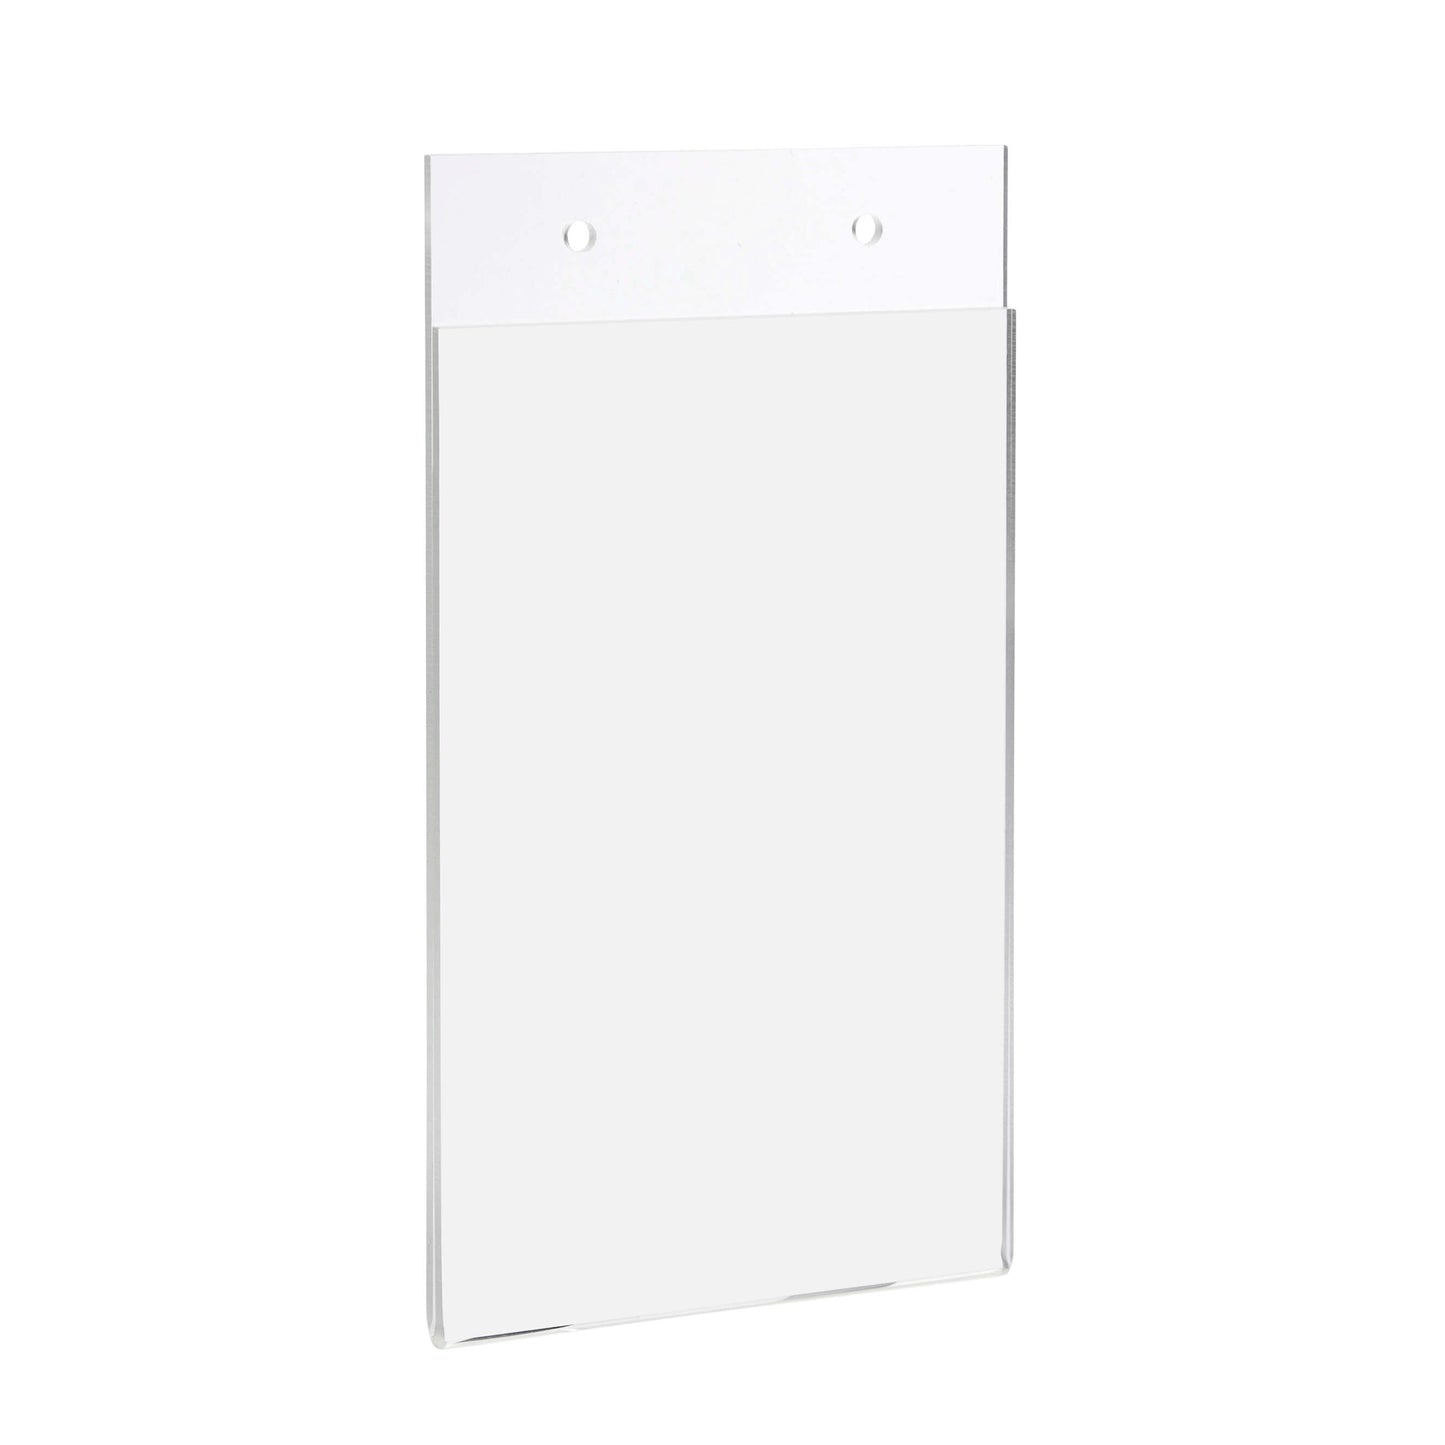 Poster Holder Wall Mount large